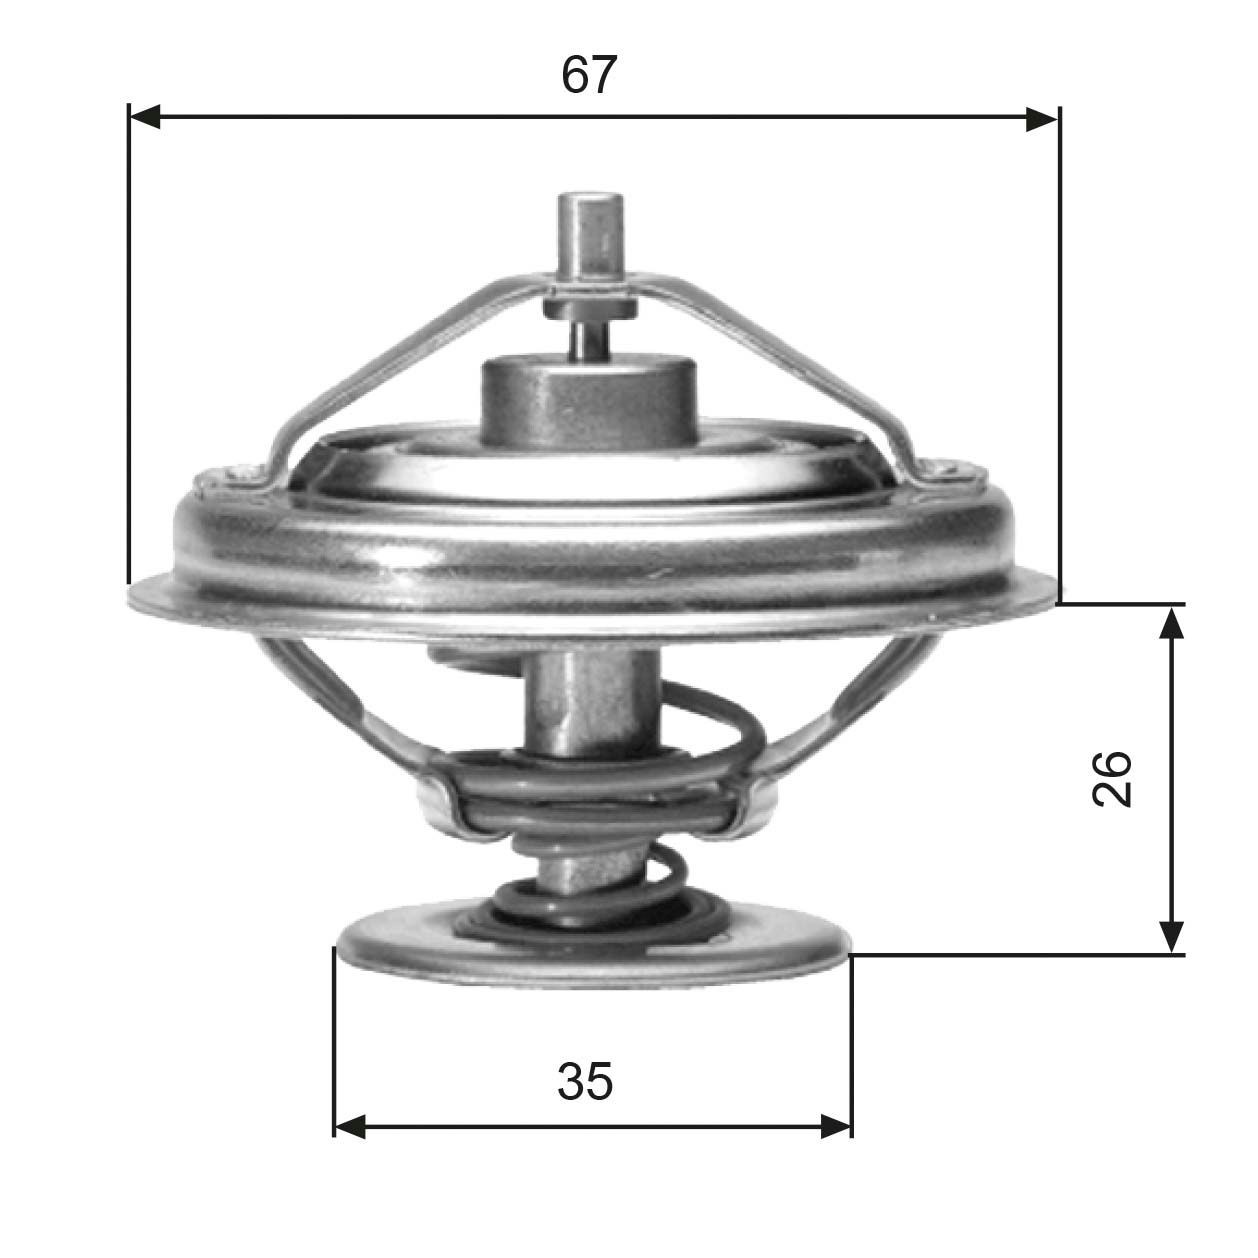 GATES TH01880G1 Engine thermostat Opening Temperature: 80°C, with gaskets/seals, without housing